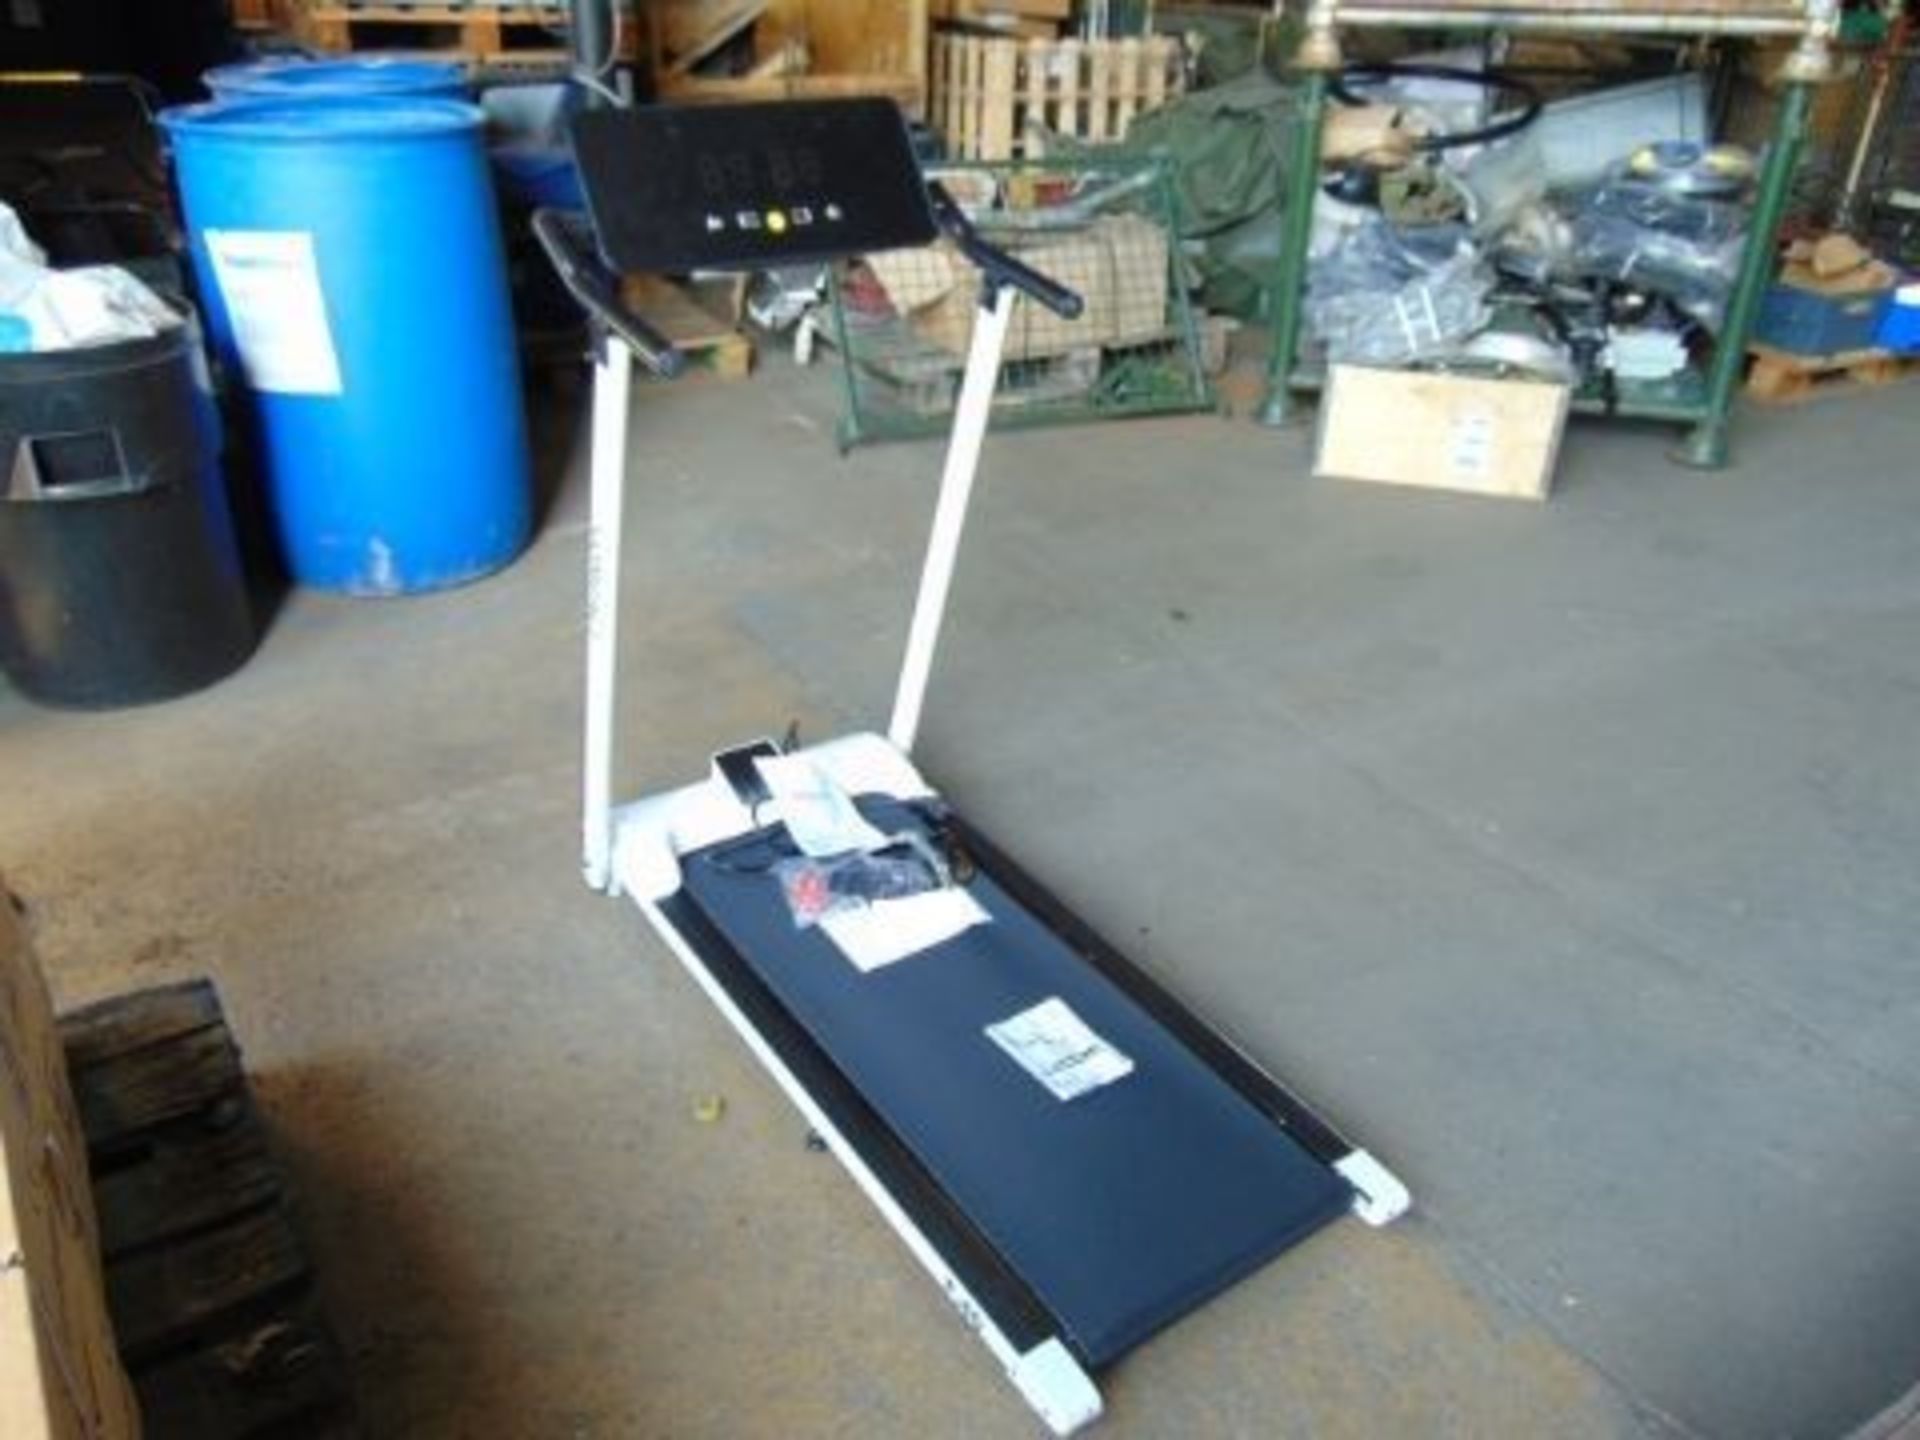 New Unused Compact 240 volt Fold up Tread Mill with Digital Controls, Programs, etc